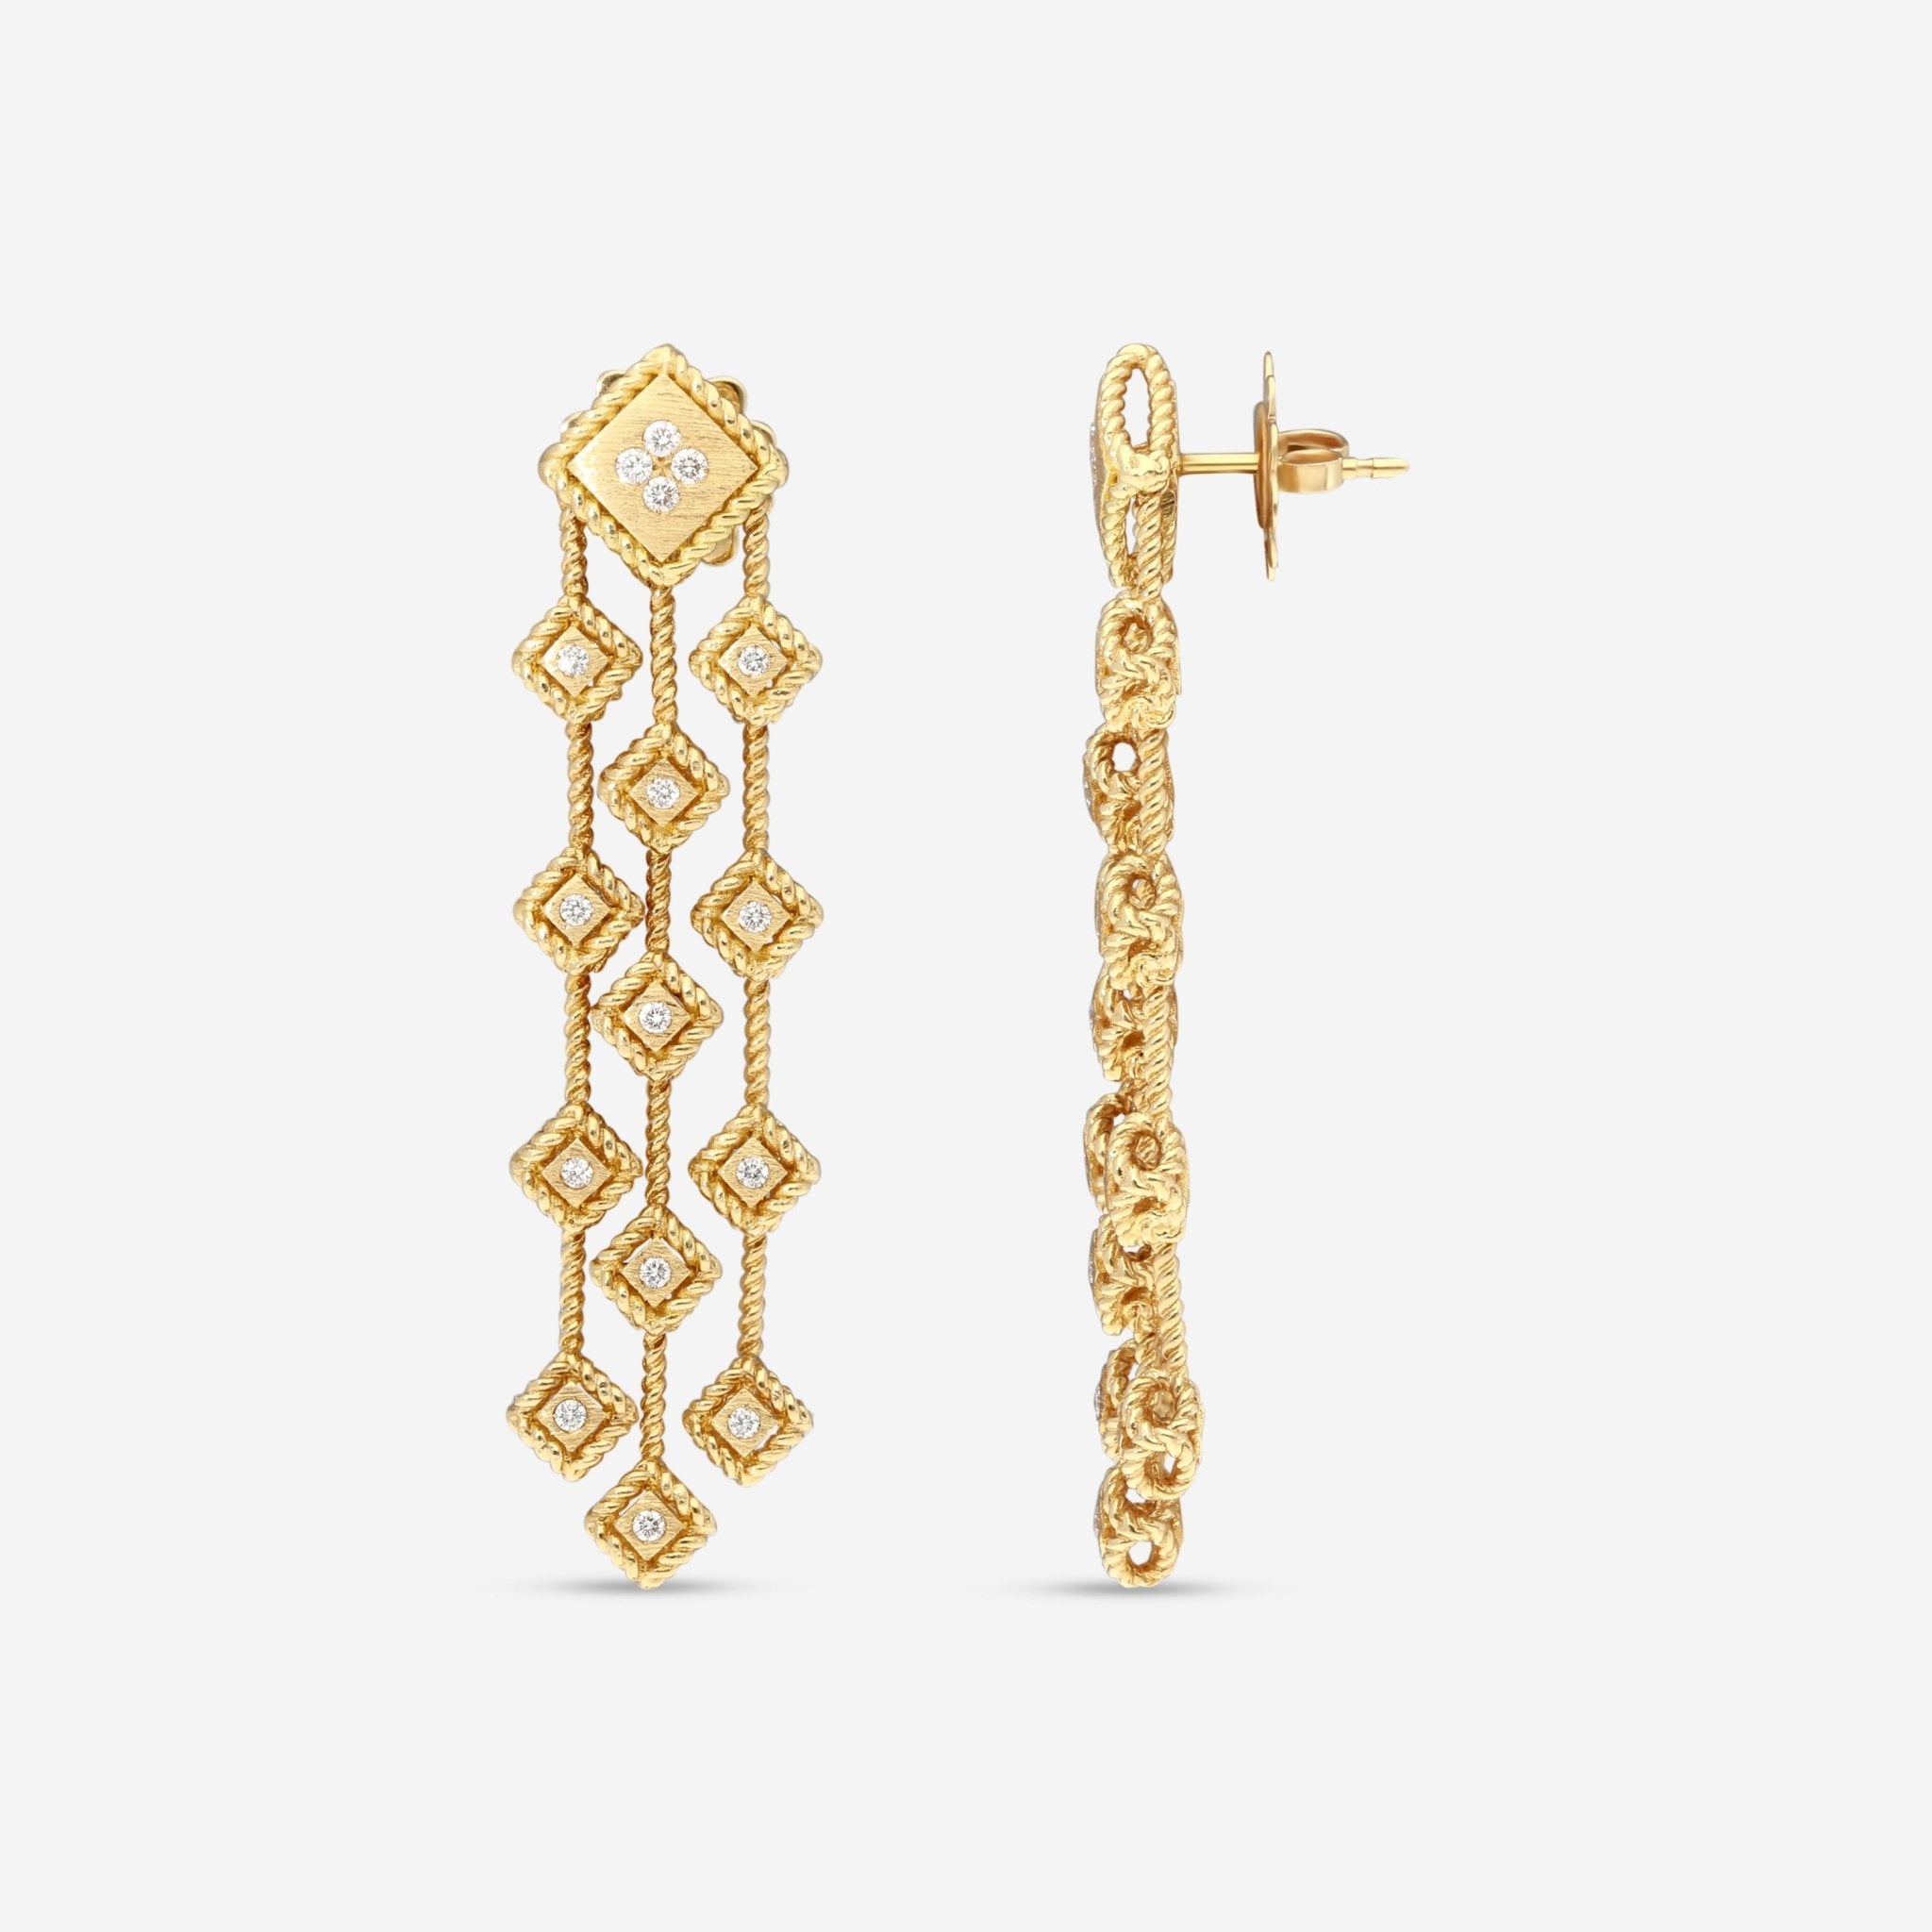 Roberto Coin Palazzo Ducale 18K Yellow Gold and Diamond Chandelier Earrings 7773144AYERX - THE SOLIST - Roberto Coin